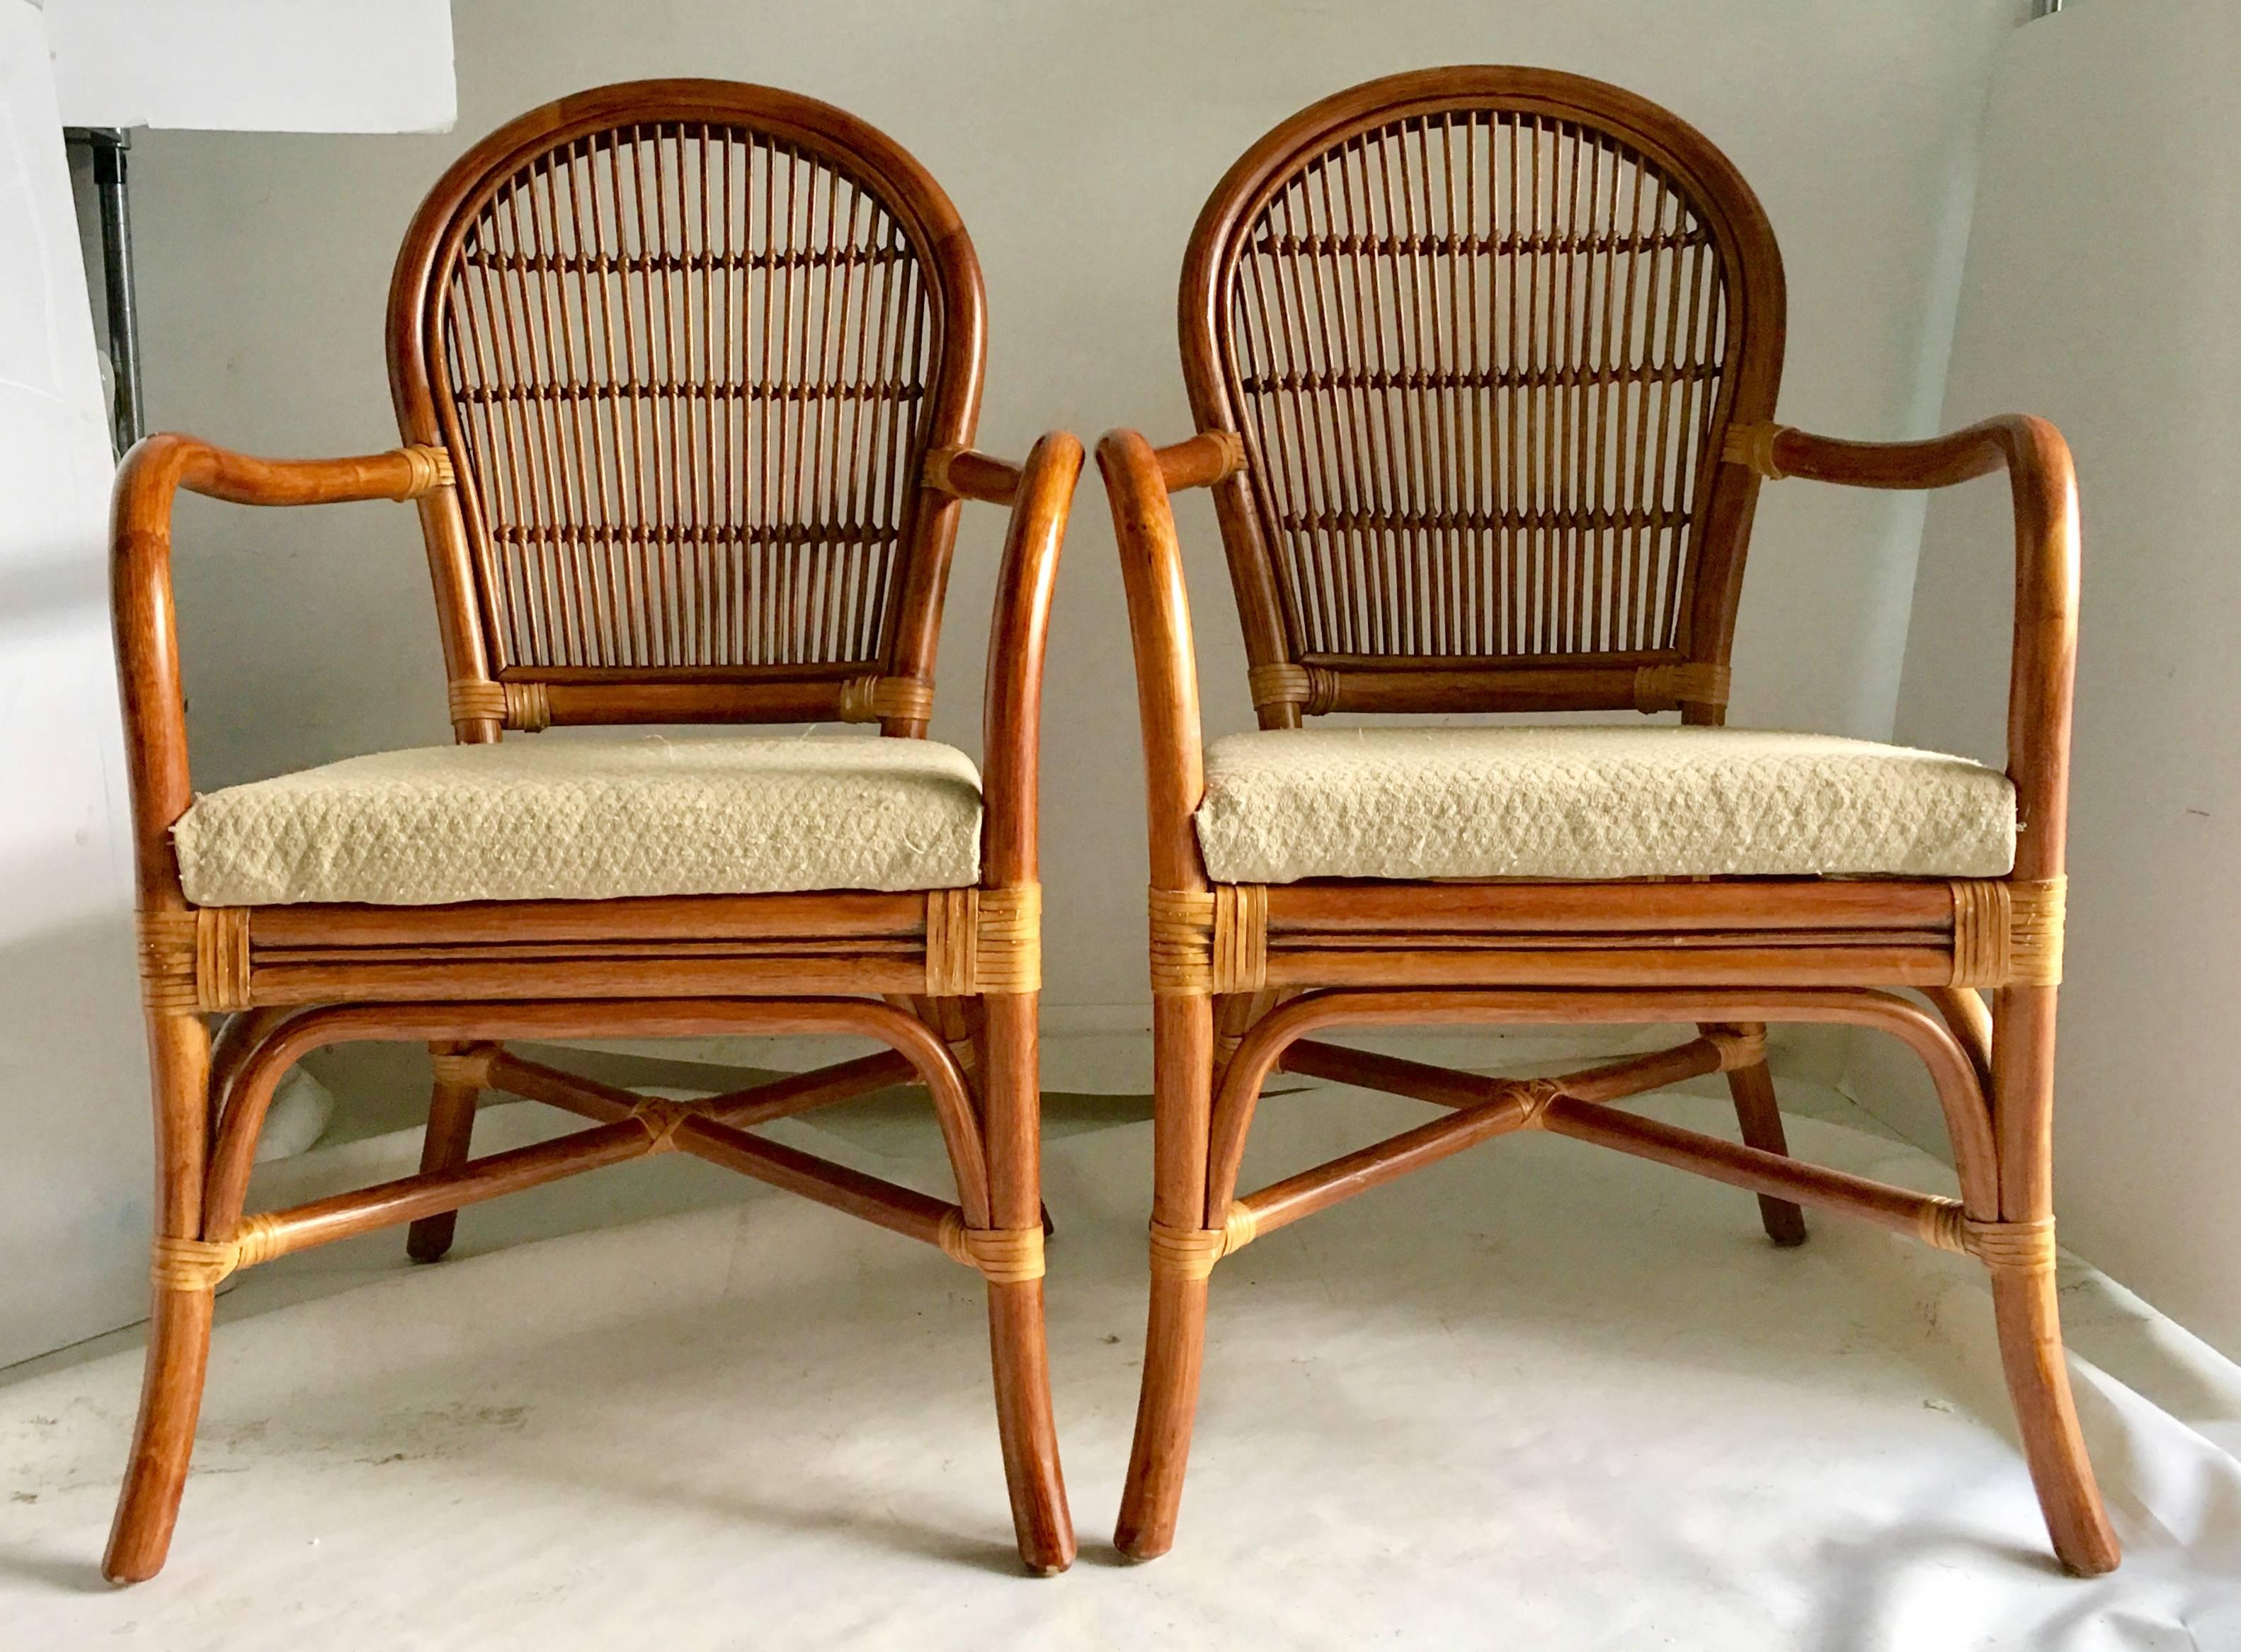 Vintage rattan bent arm rattan and wicker leather strap upholstered seat arm chairs, set of four. Features rounded open back detail with leather strap wraps. Seats are upholstered in cotton and most likely need replacing. Seat cushions are 2